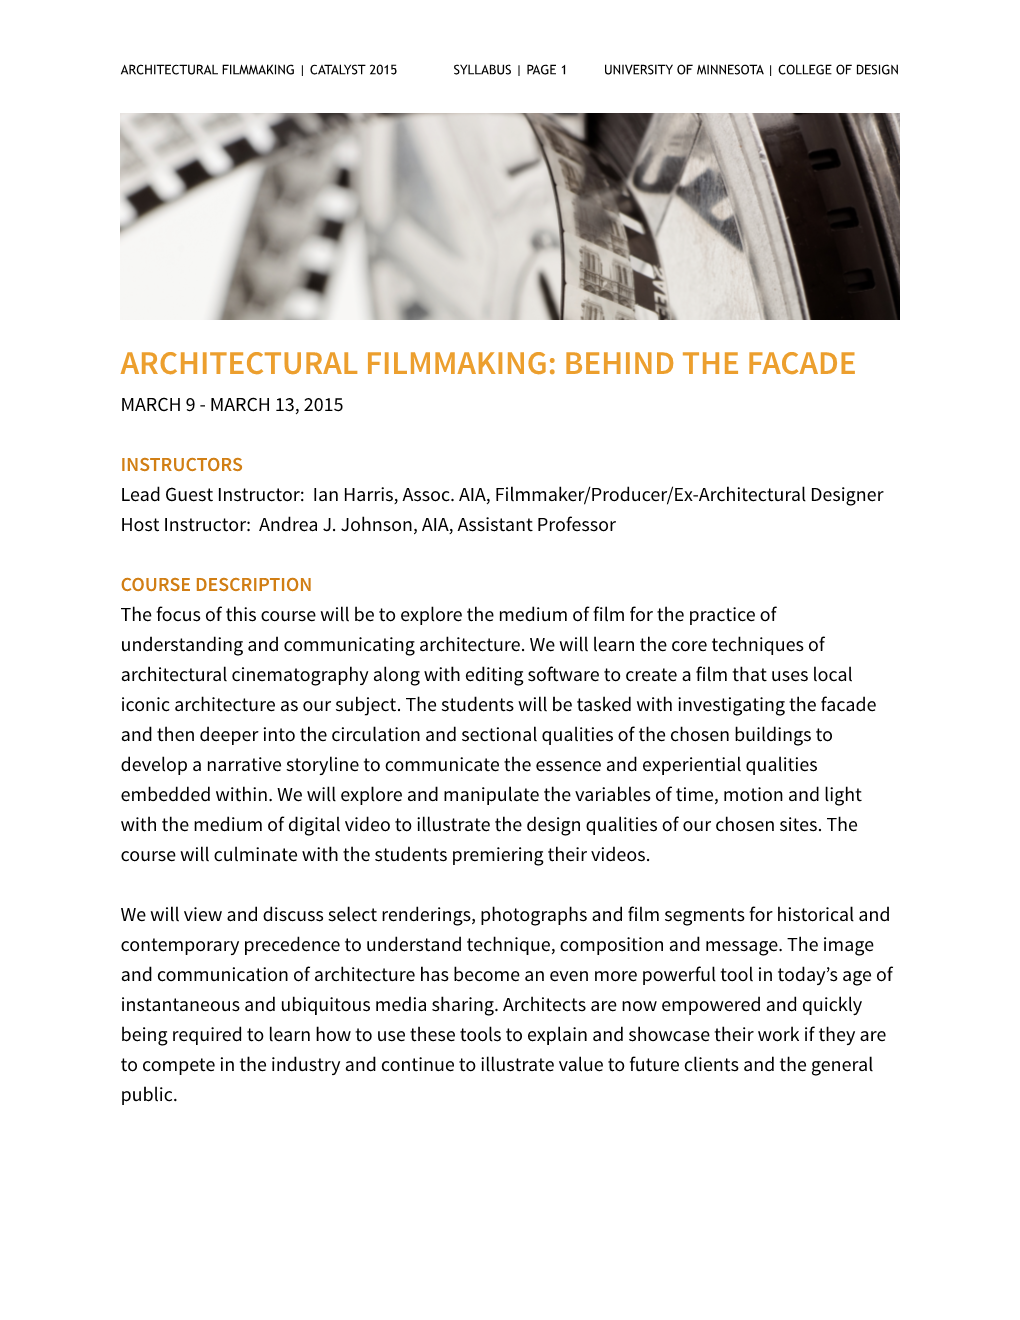 Architectural Filmmaking | Catalyst 2015 Syllabus | Page 1 University of Minnesota | College of Design